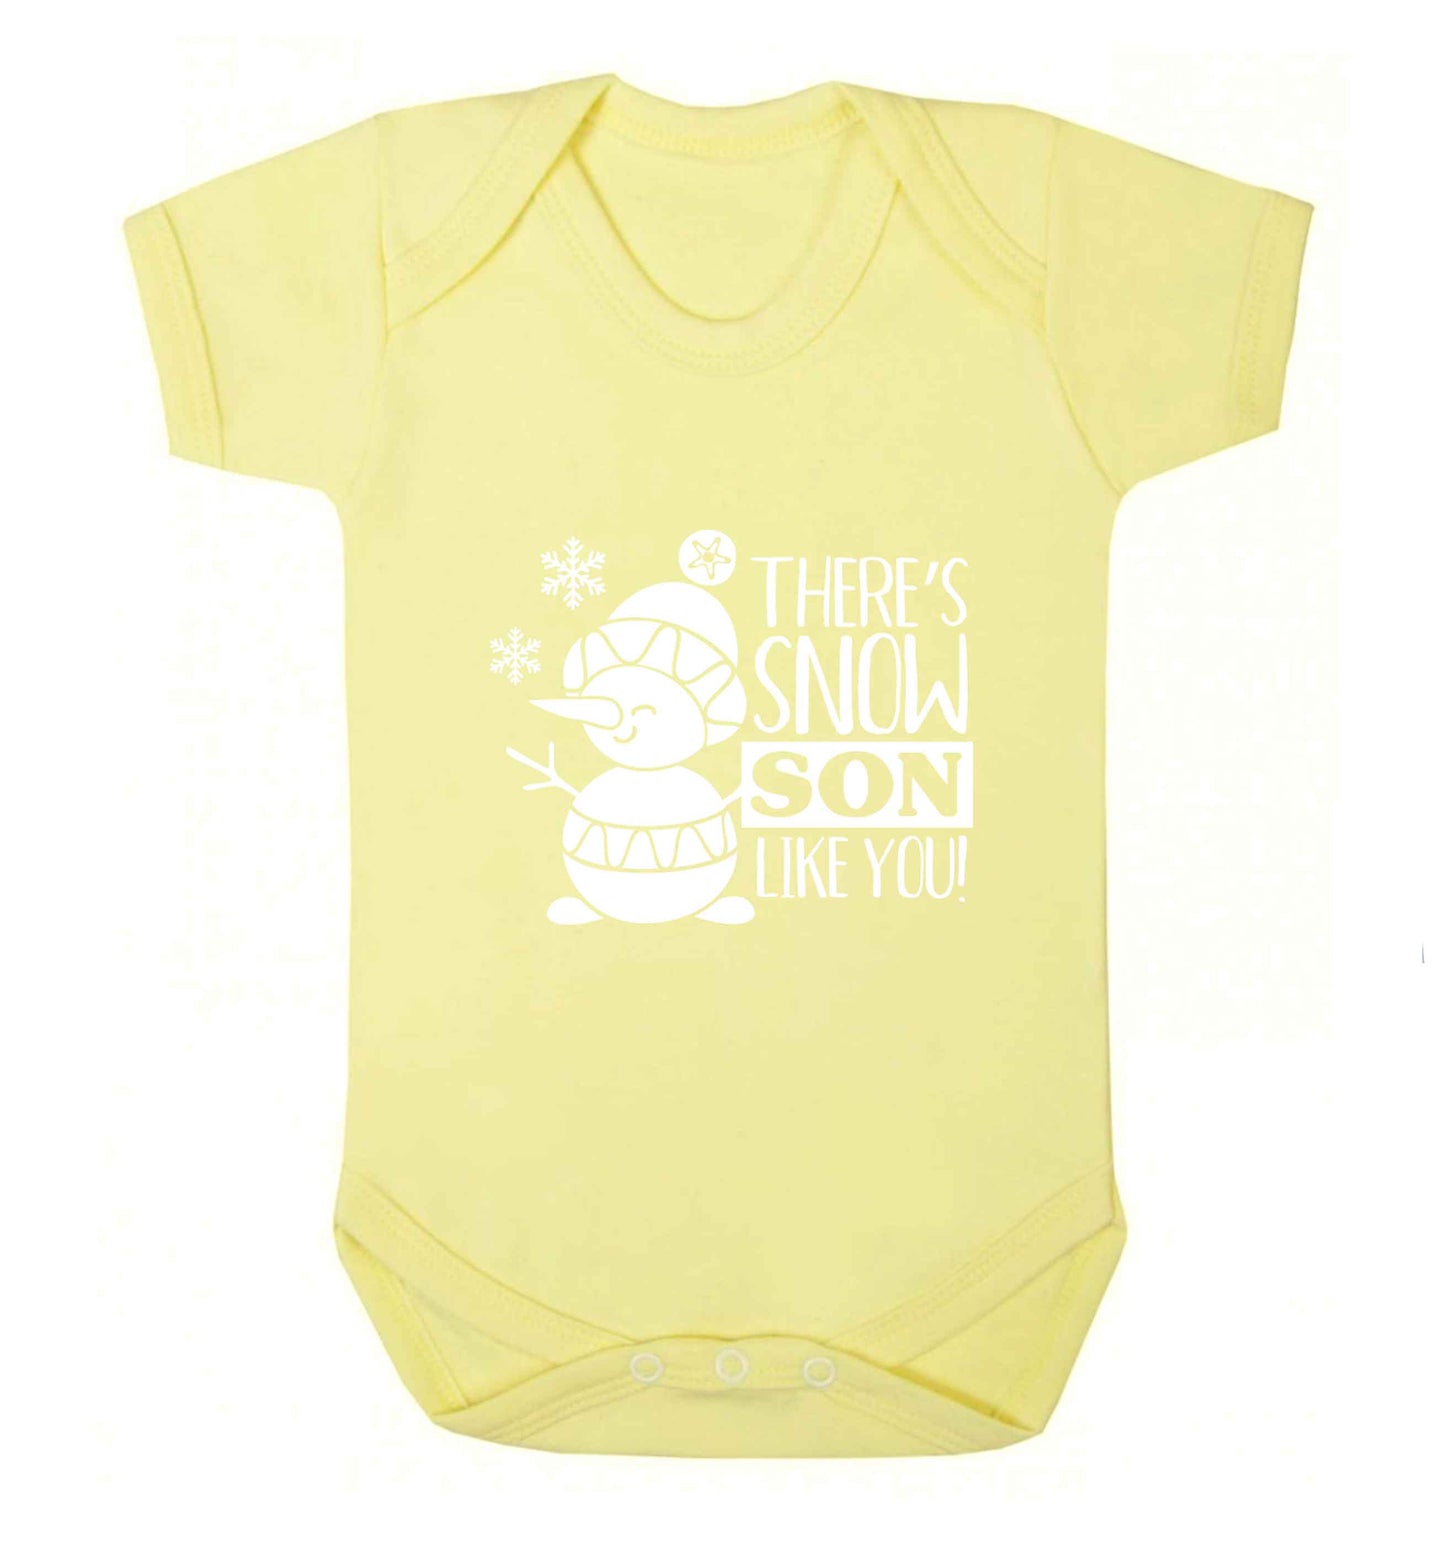 There's snow son like you baby vest pale yellow 18-24 months